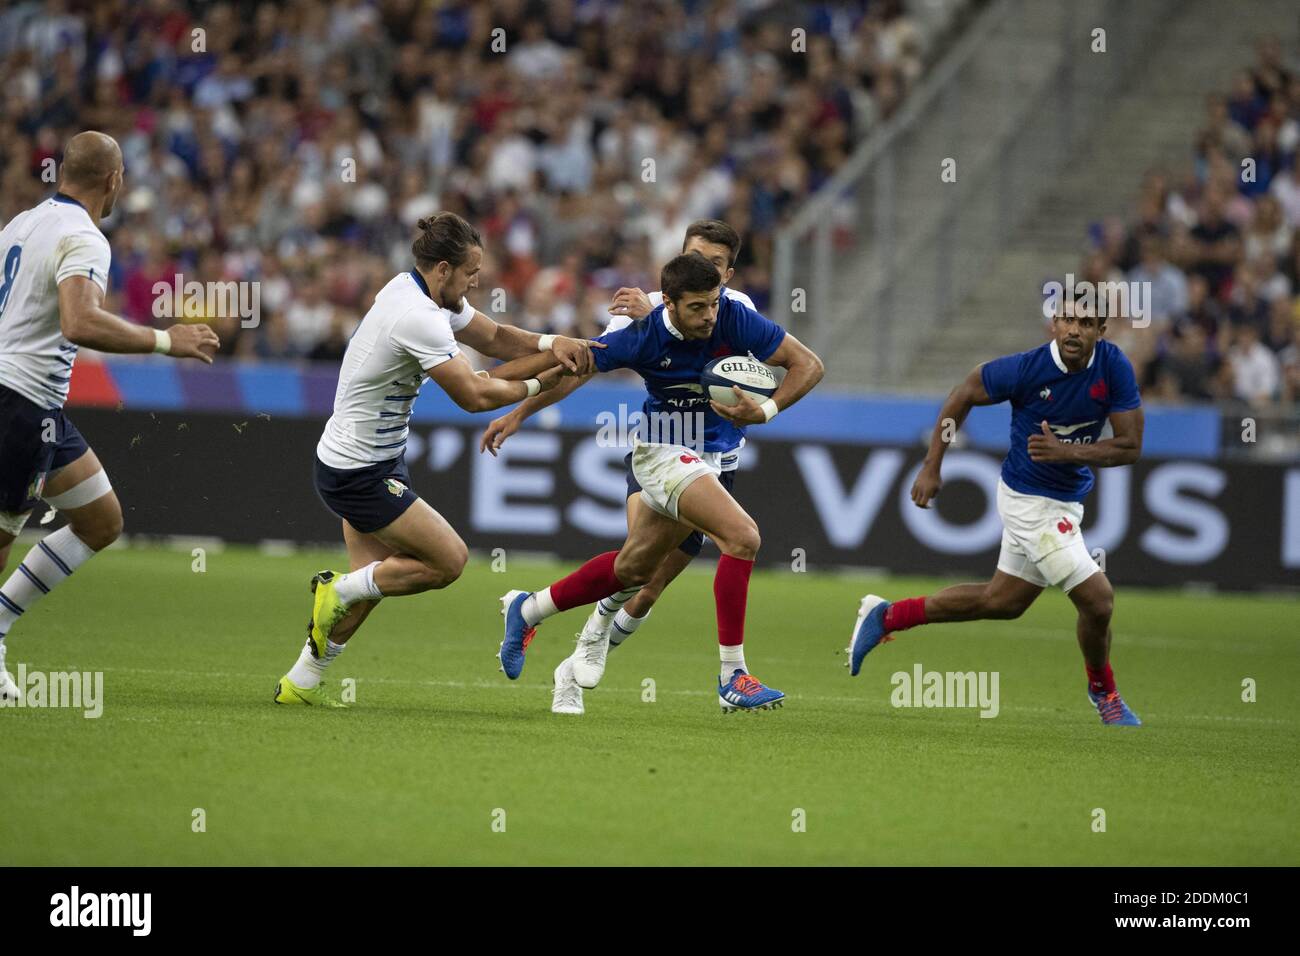 Romain NTAMACK in action during 2019 Rugby World Cup warm-up match France v  Italy at Stade De France on August 30, 2019 in Paris, France. France won  47-19. Photo by Loic Baratoux/ABACAPRESS.COM